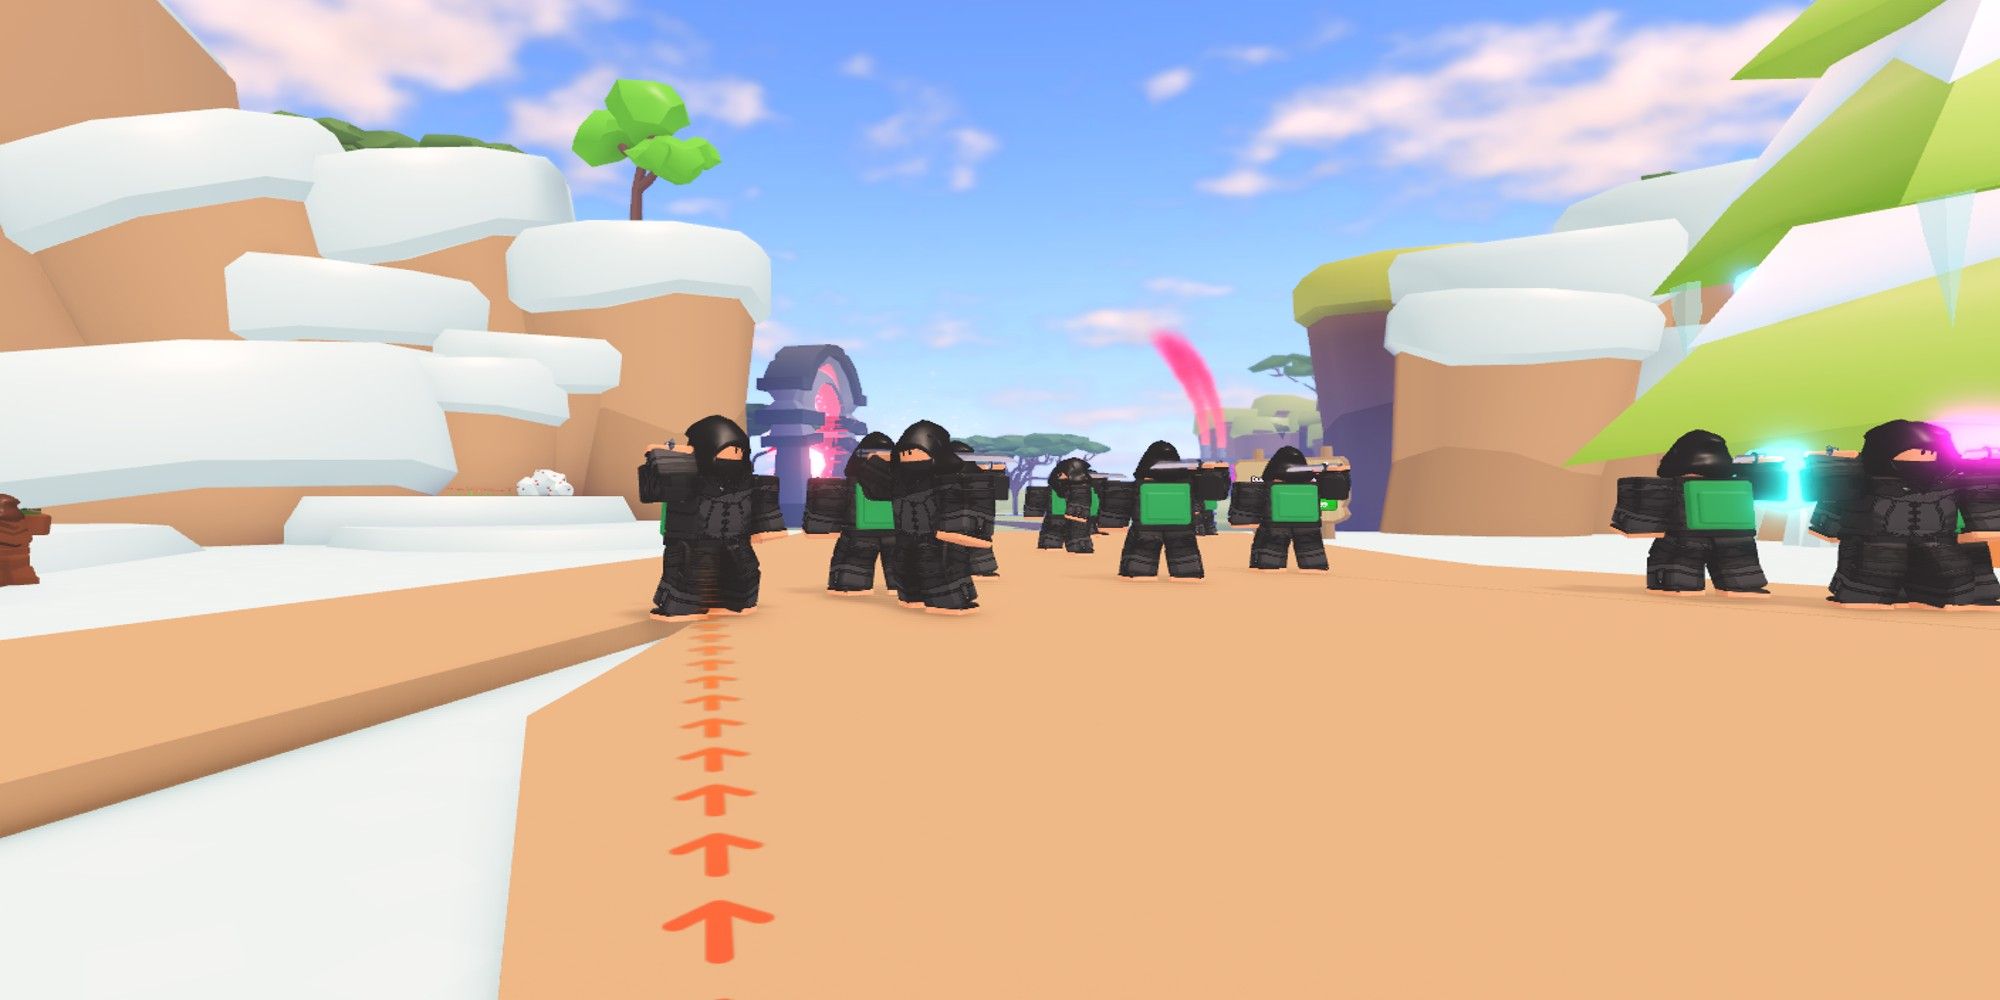 Roblox Clicker Run codes for February 2023: Free coins, boosts